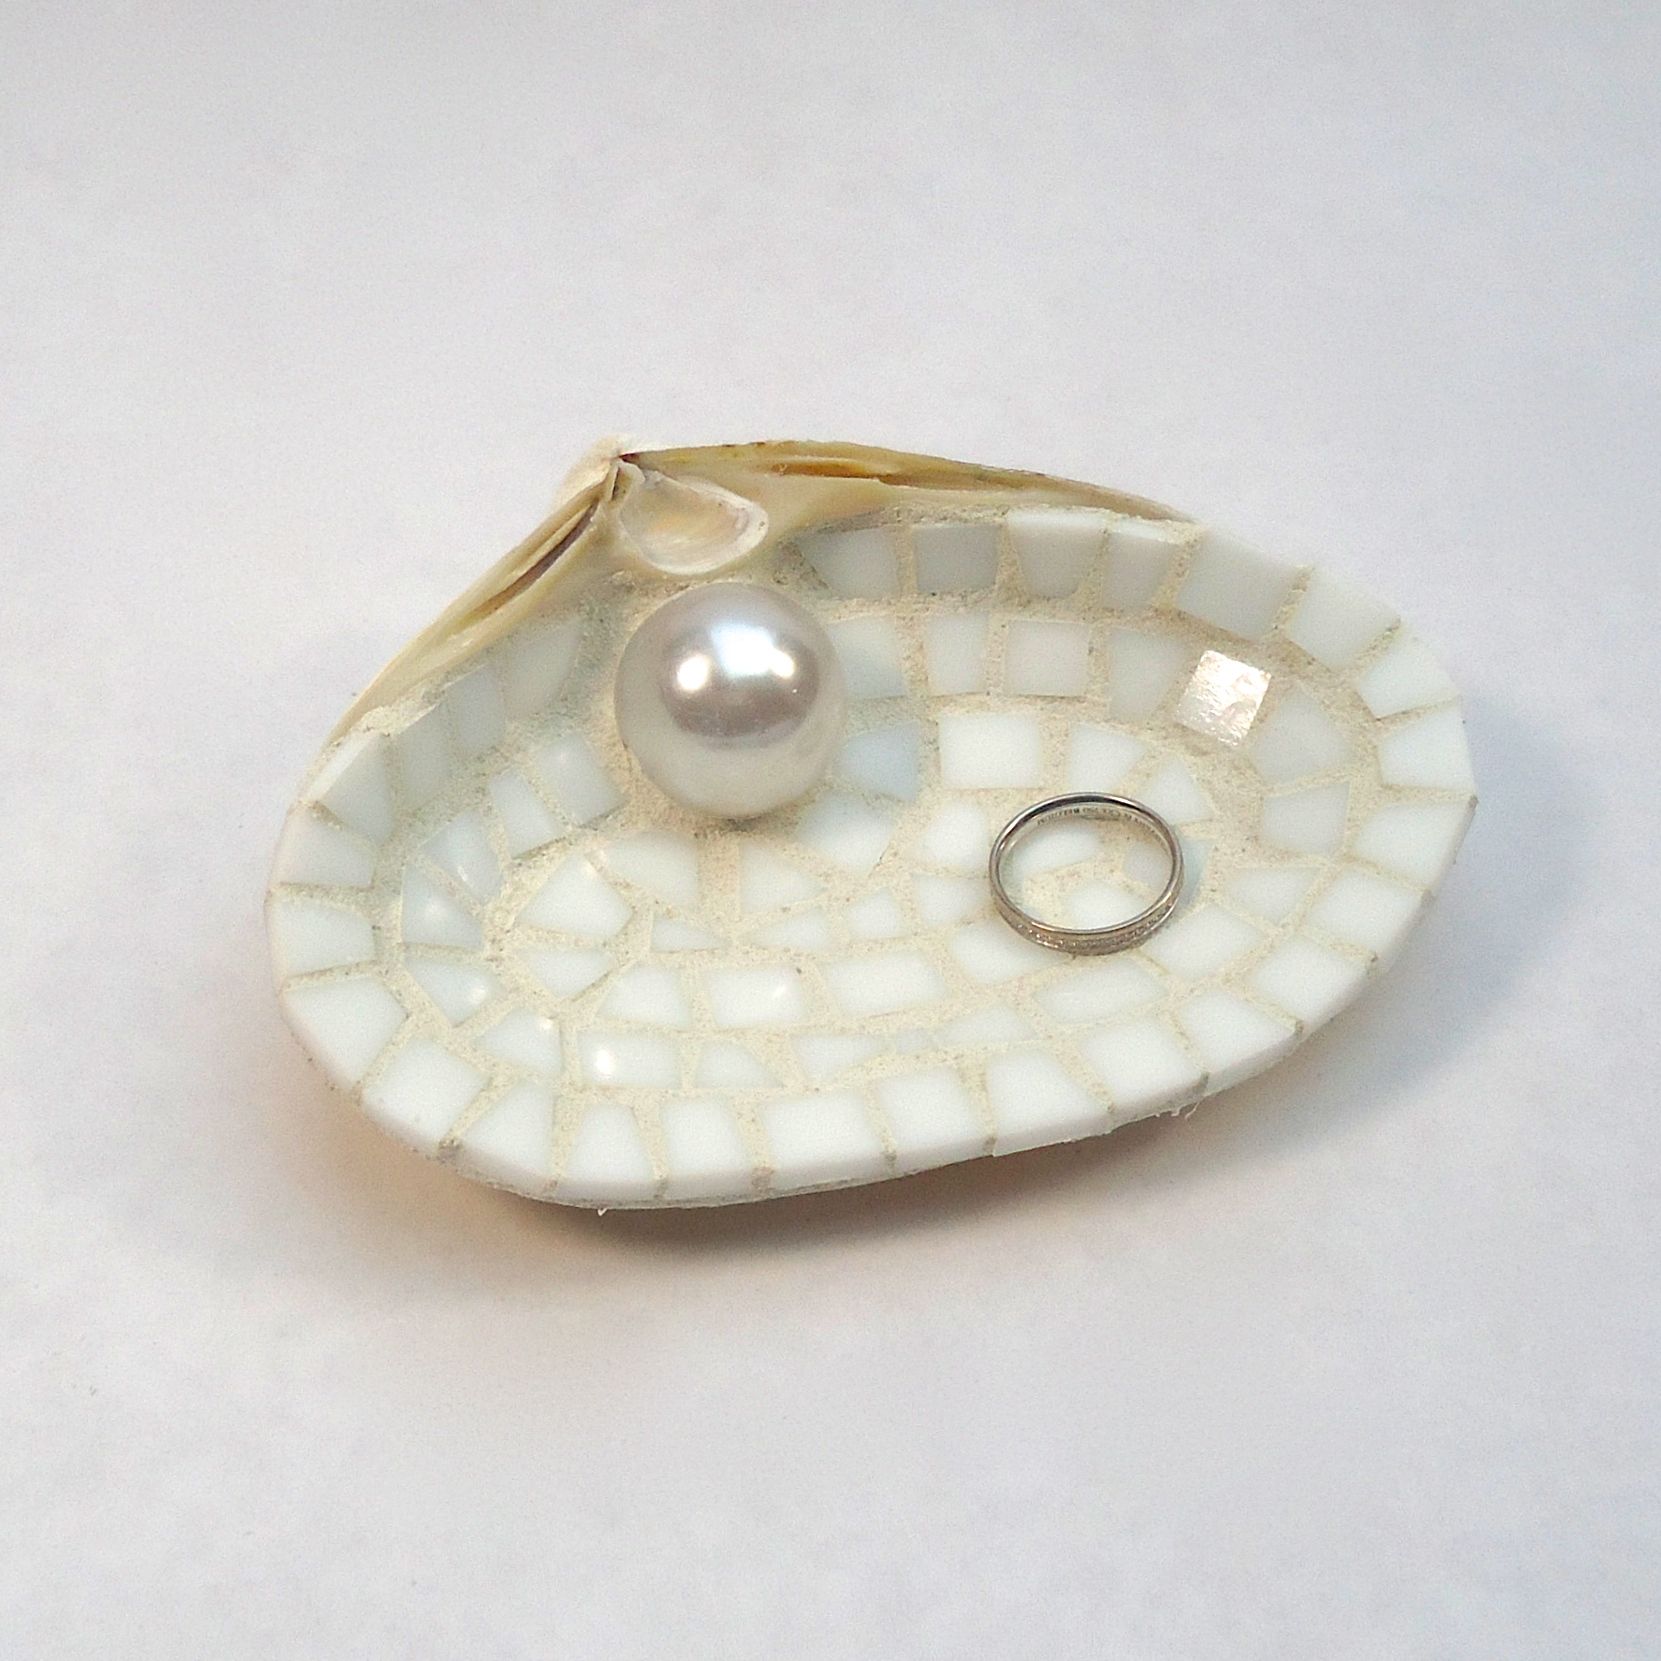 Buy a Hand Crafted Extra Large White Seashell Wedding Ring Dish With ...